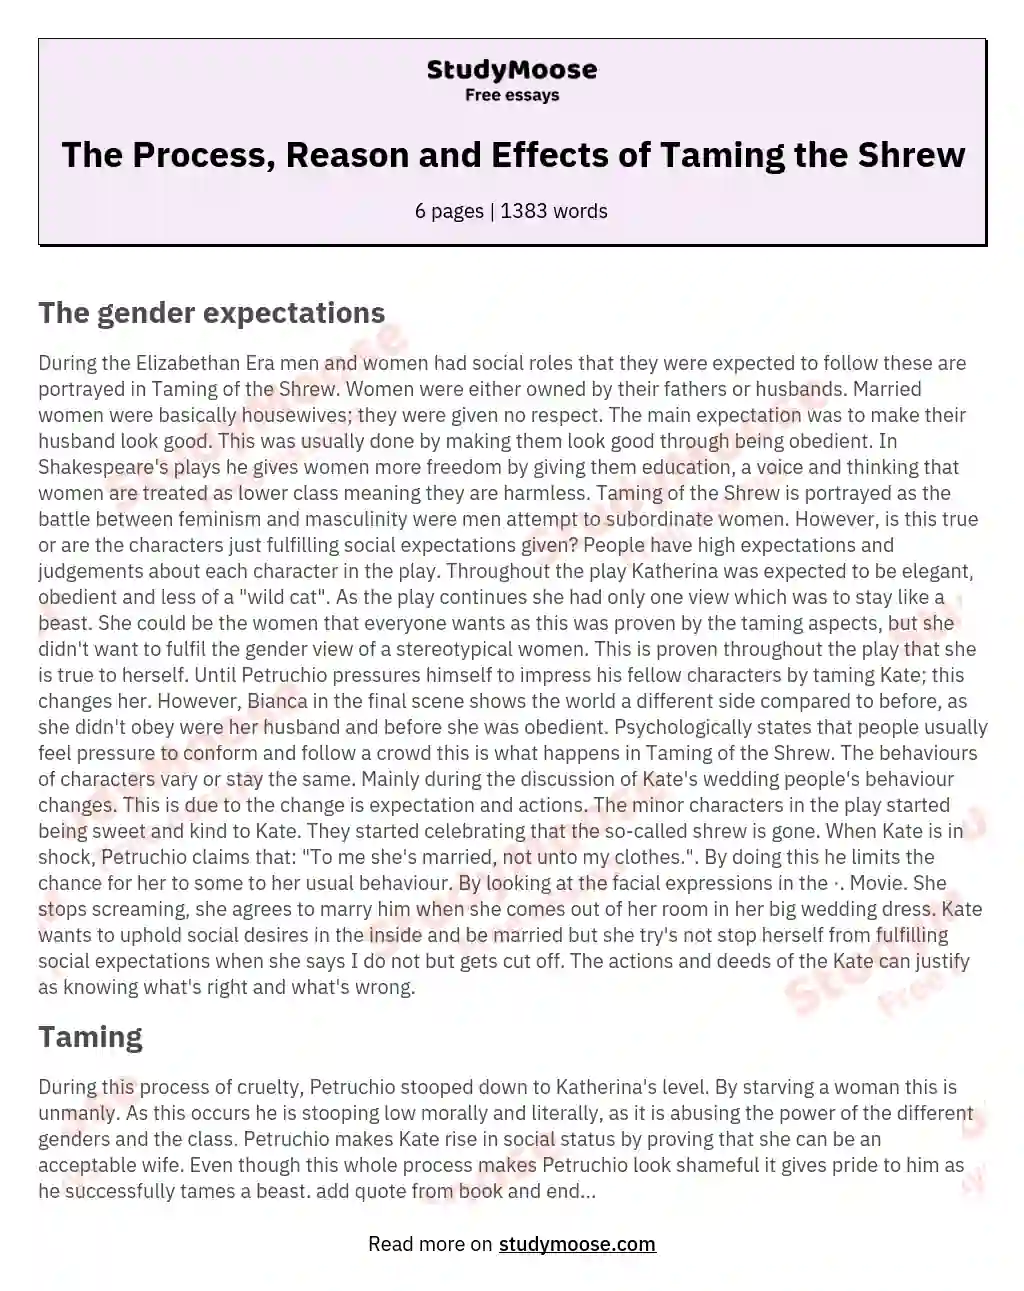 The Process, Reason and Effects of Taming the Shrew